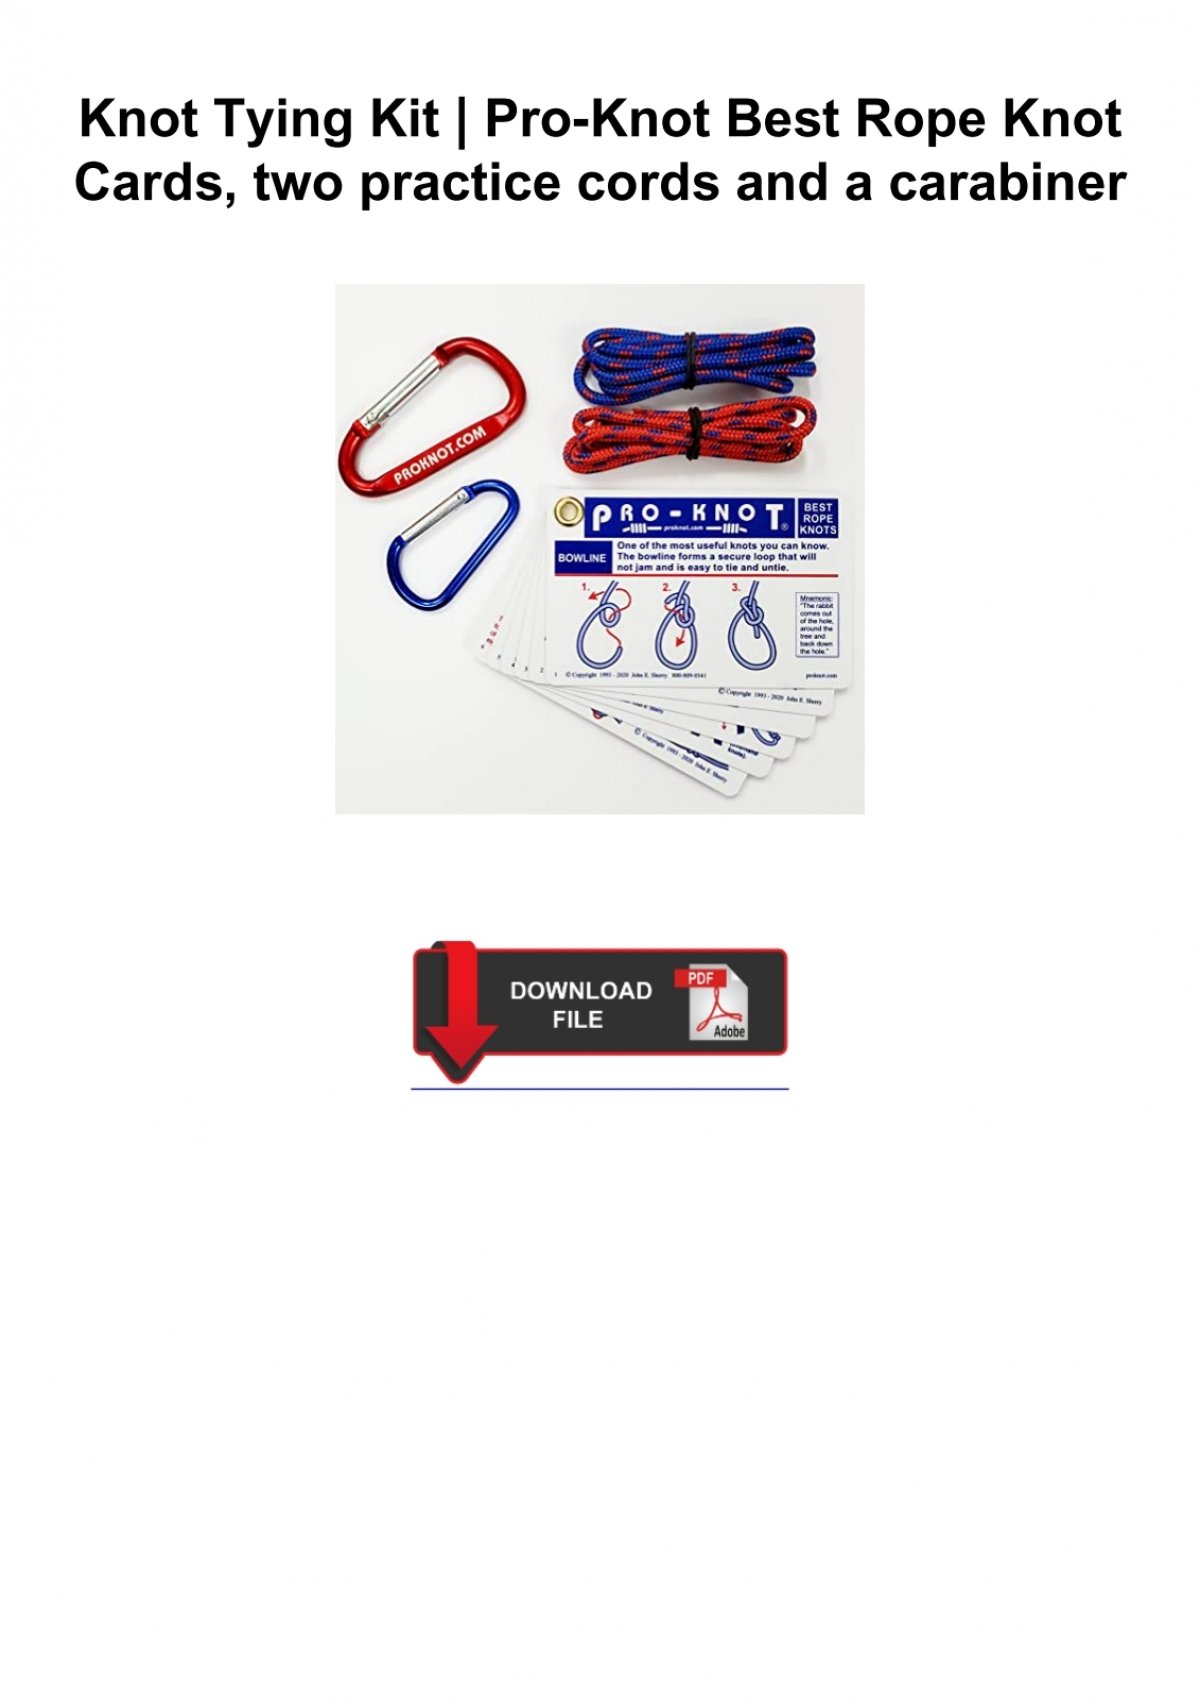 DOWNLOAD [PDF] Knot Tying Kit  Pro-Knot Best Rope Knot Cards, two